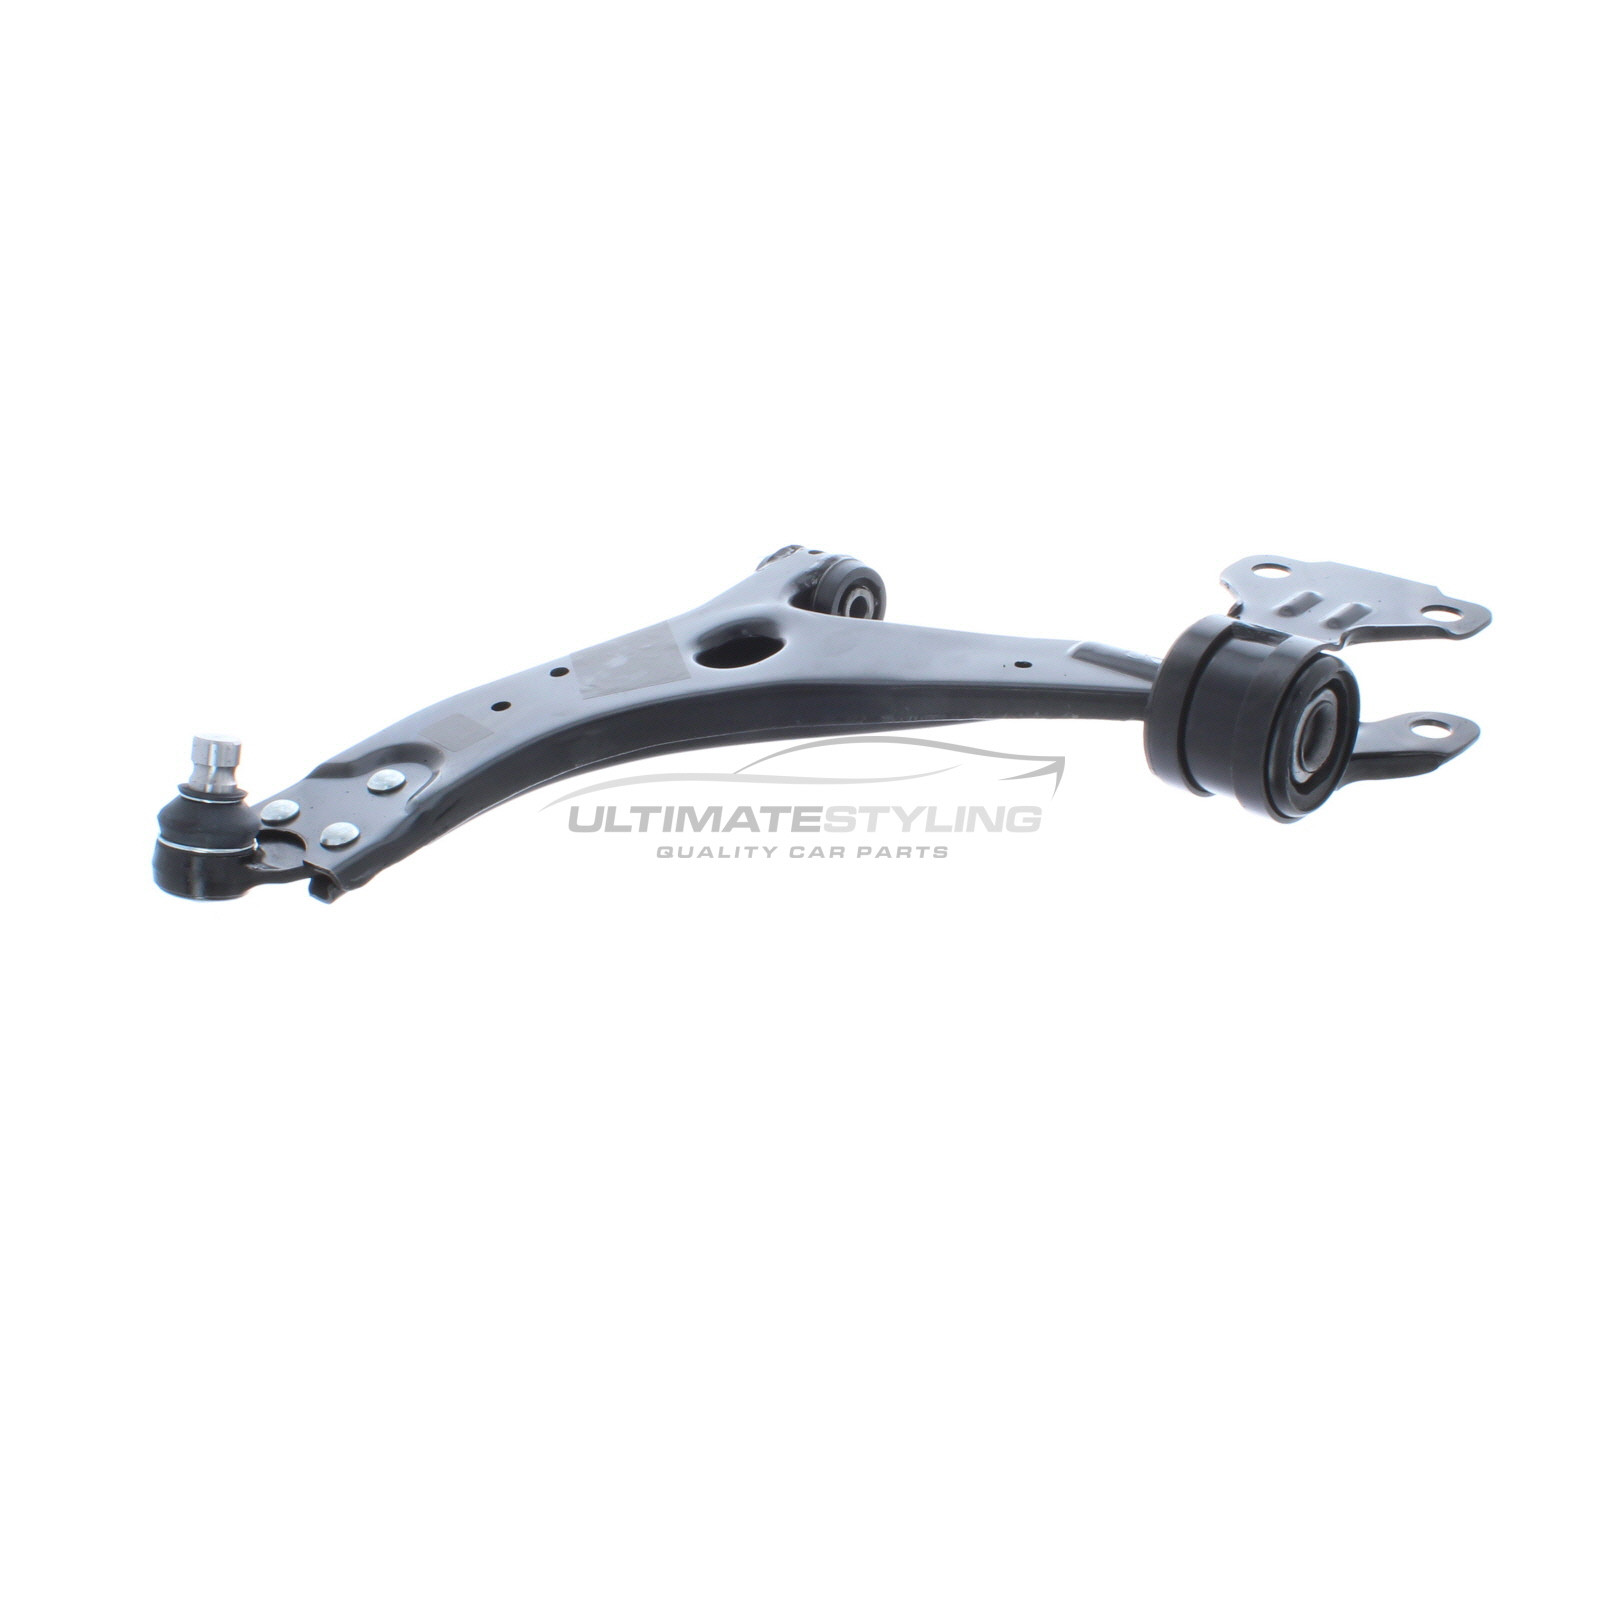 Ford C-MAX 2010-2019, Ford Focus 2011-2018 Front Lower Suspension Arm (Pressed Steel) Including Ball Joint and Rear Bush Passenger Side (LH)